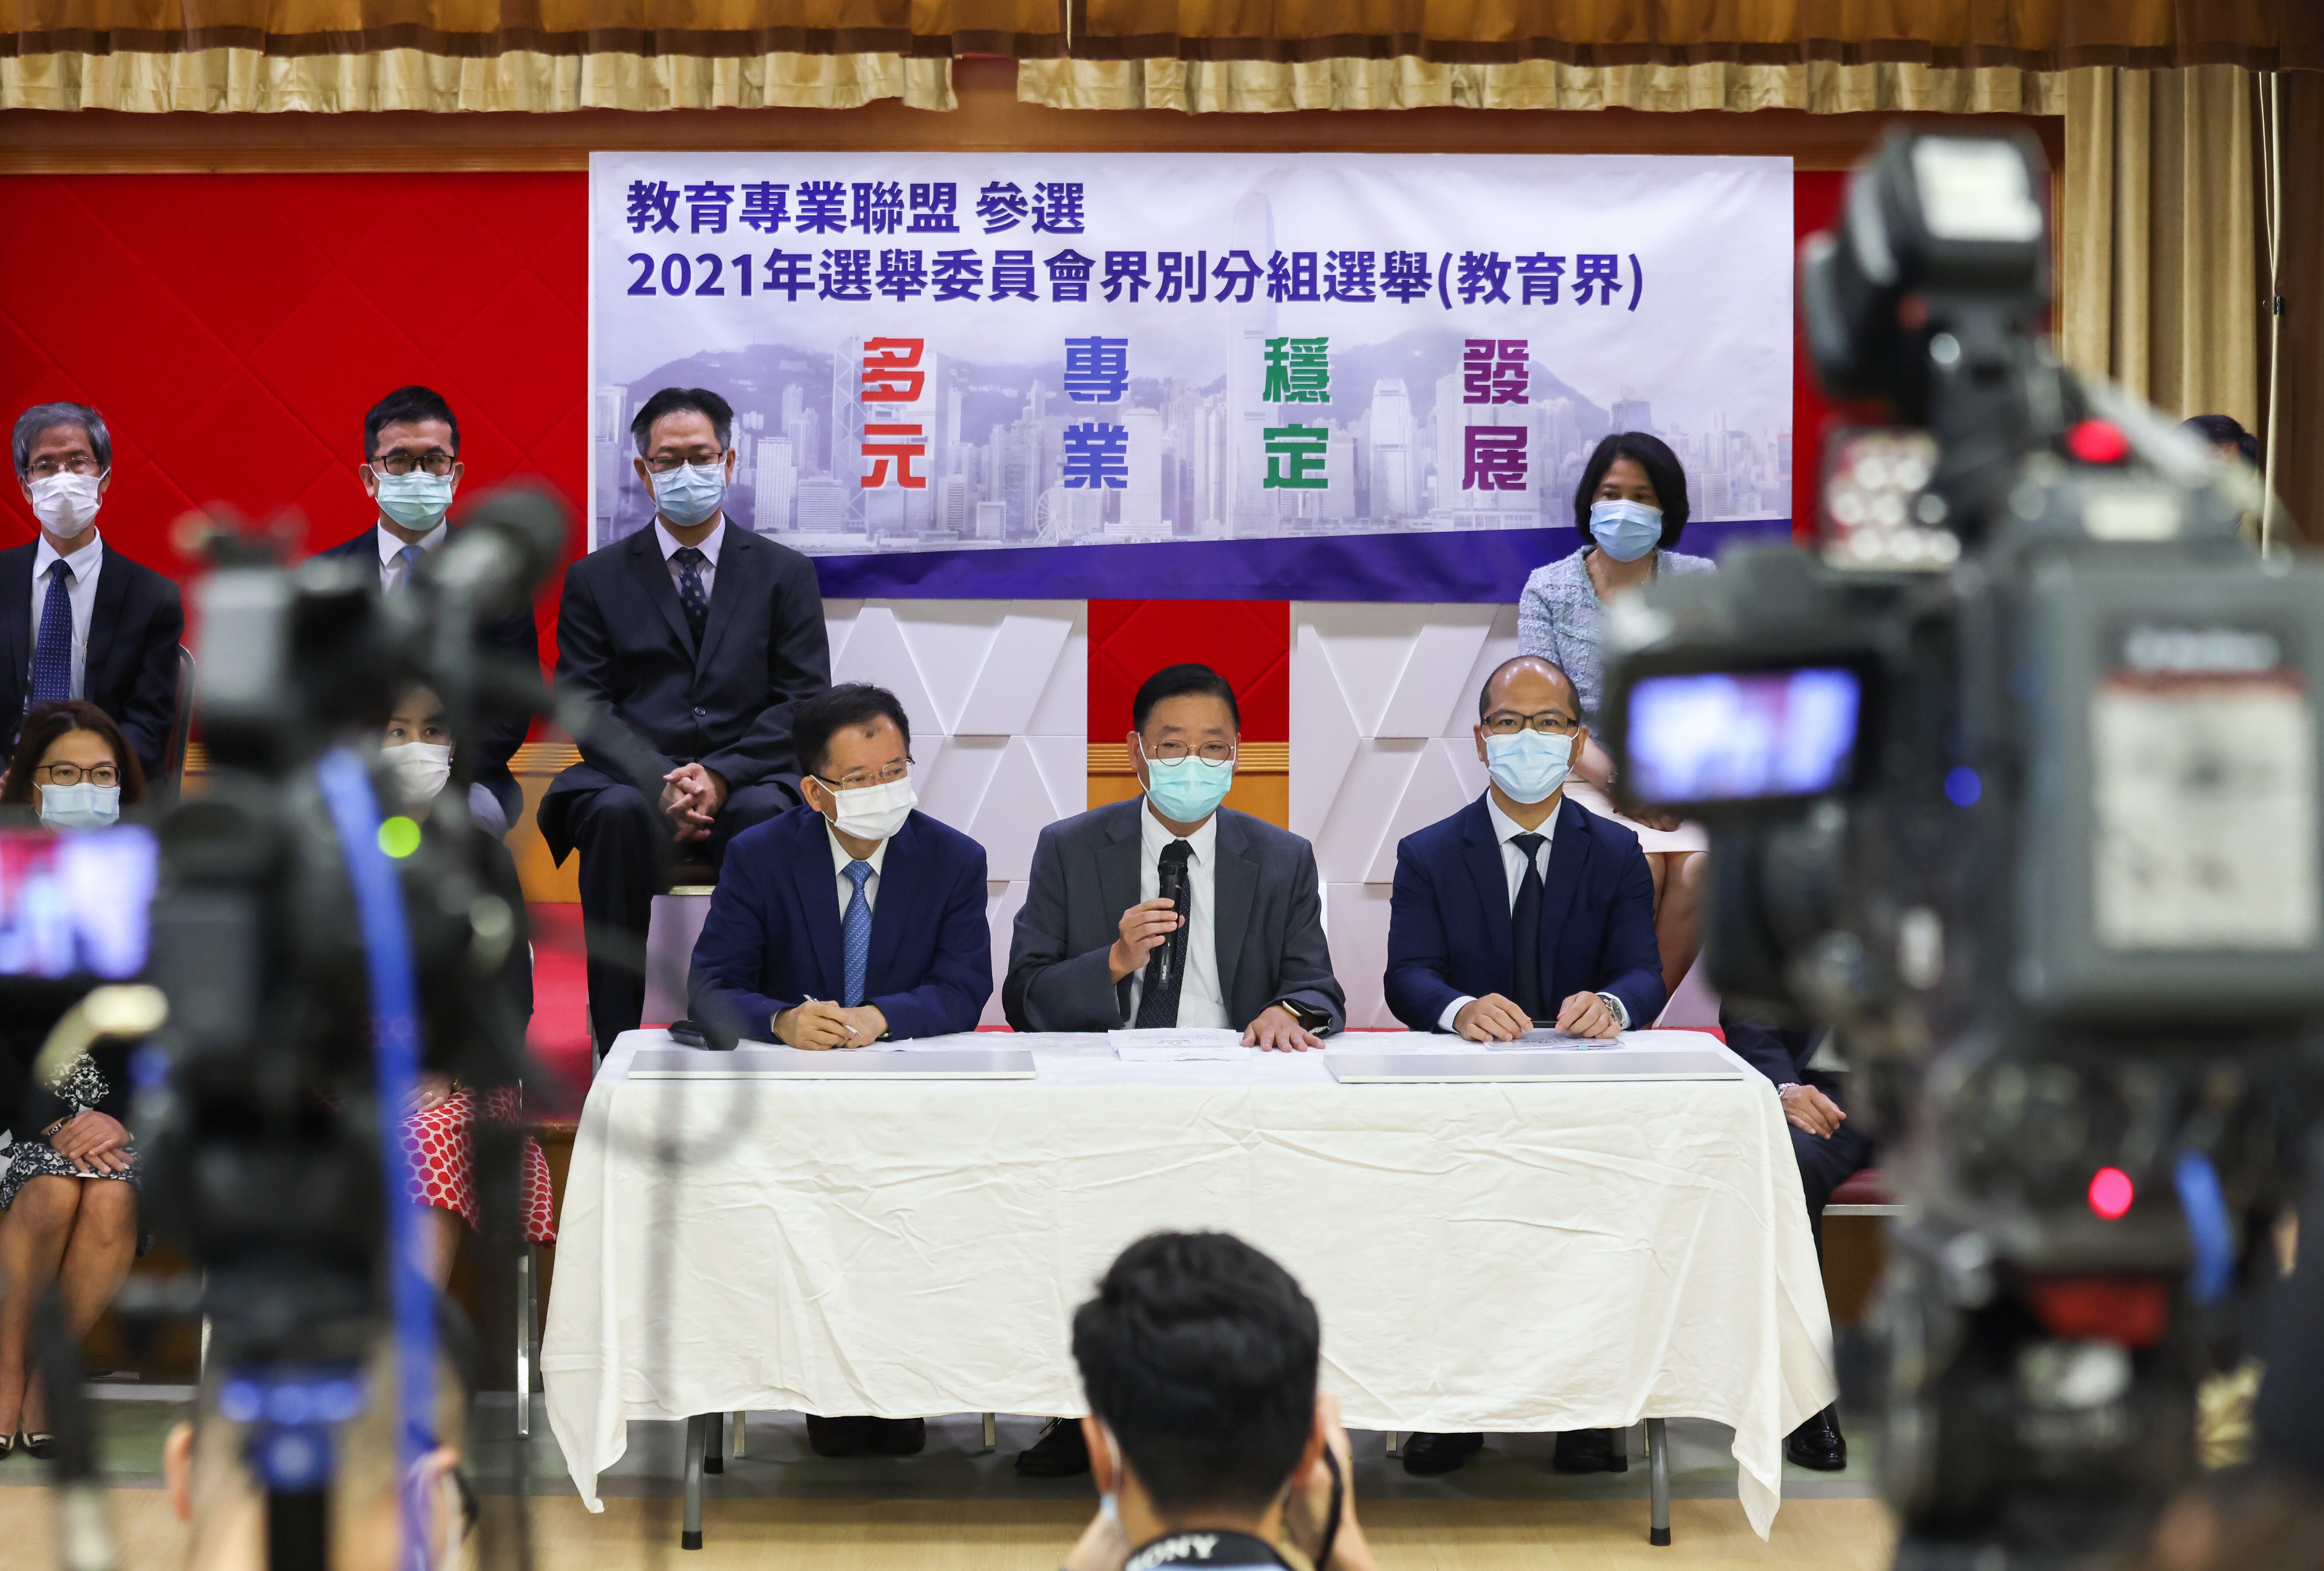 Representatives of a newly formed establishment-leaning educational alliance announce their members’ candidacy for Election Committee seats on Monday. Photo: Nora Tam